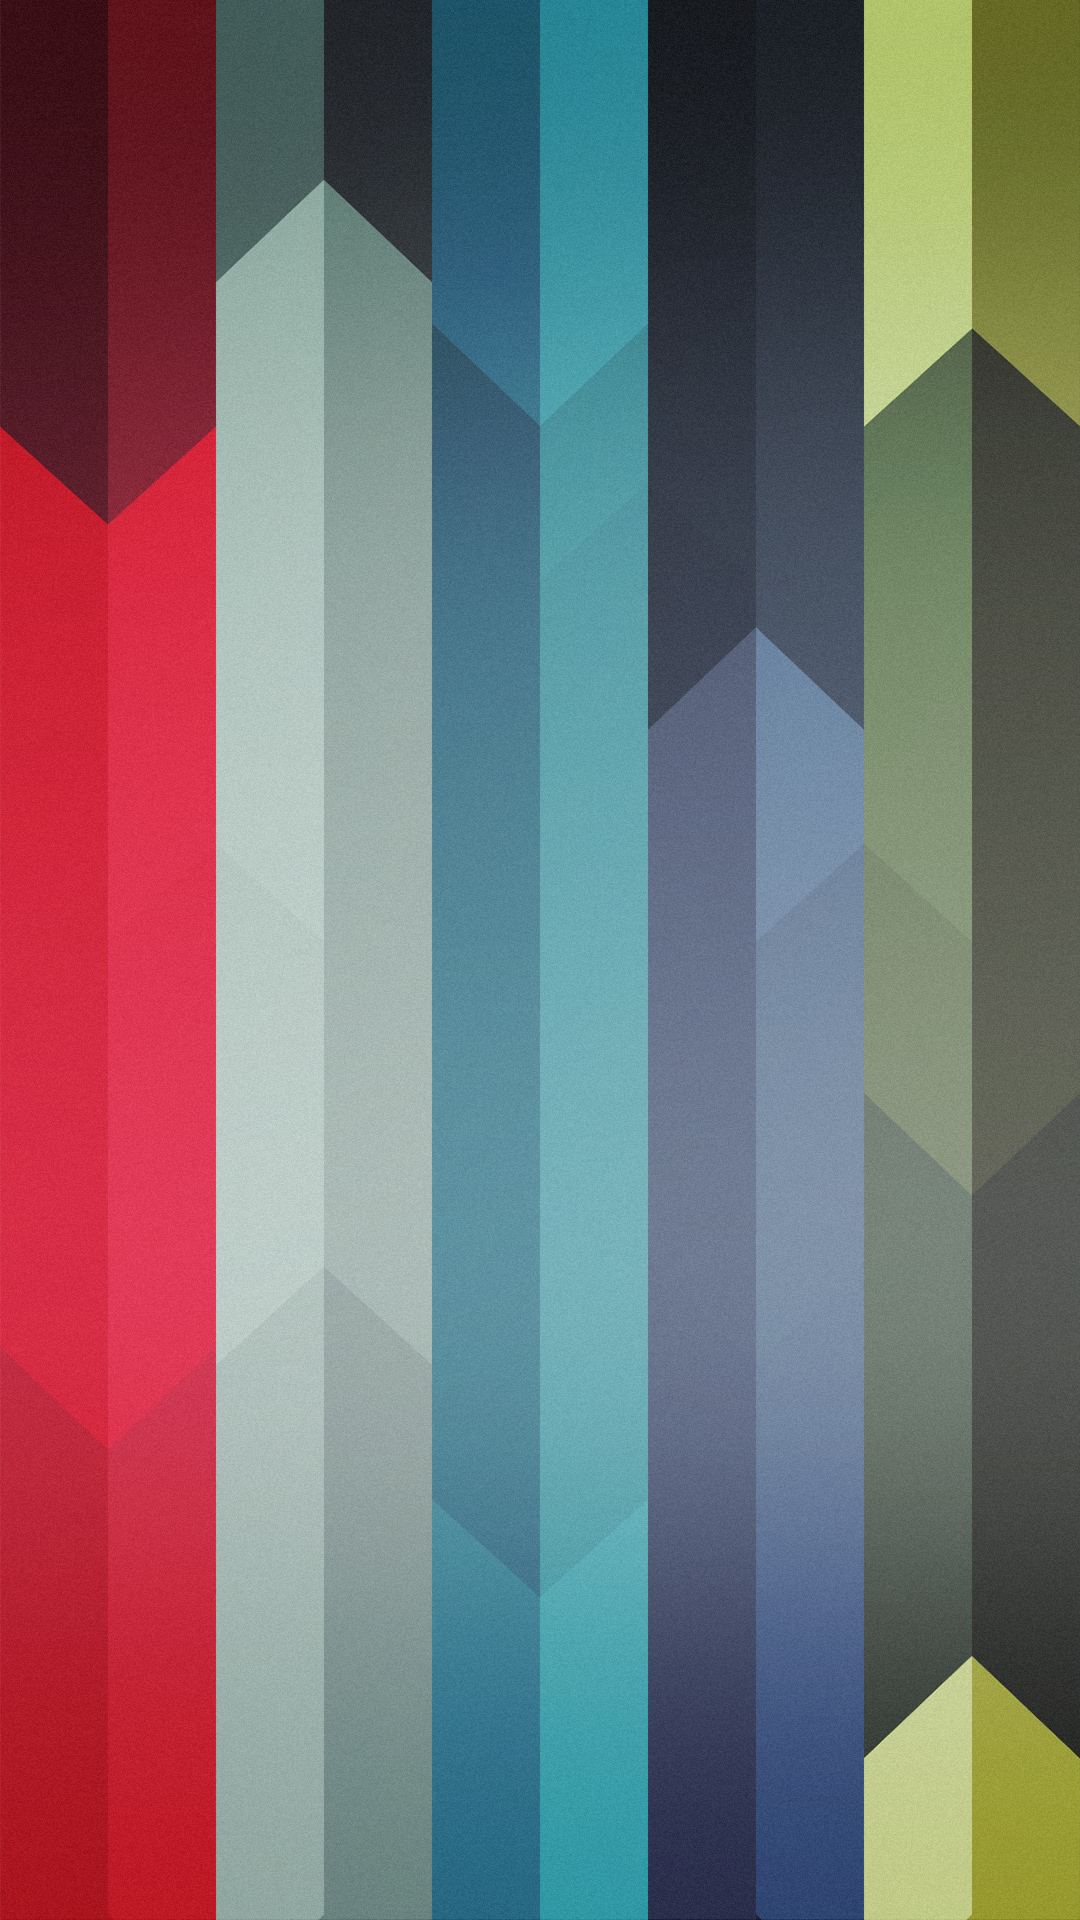 Customize Your Phone With Htc New Sense Wallpaper Collection